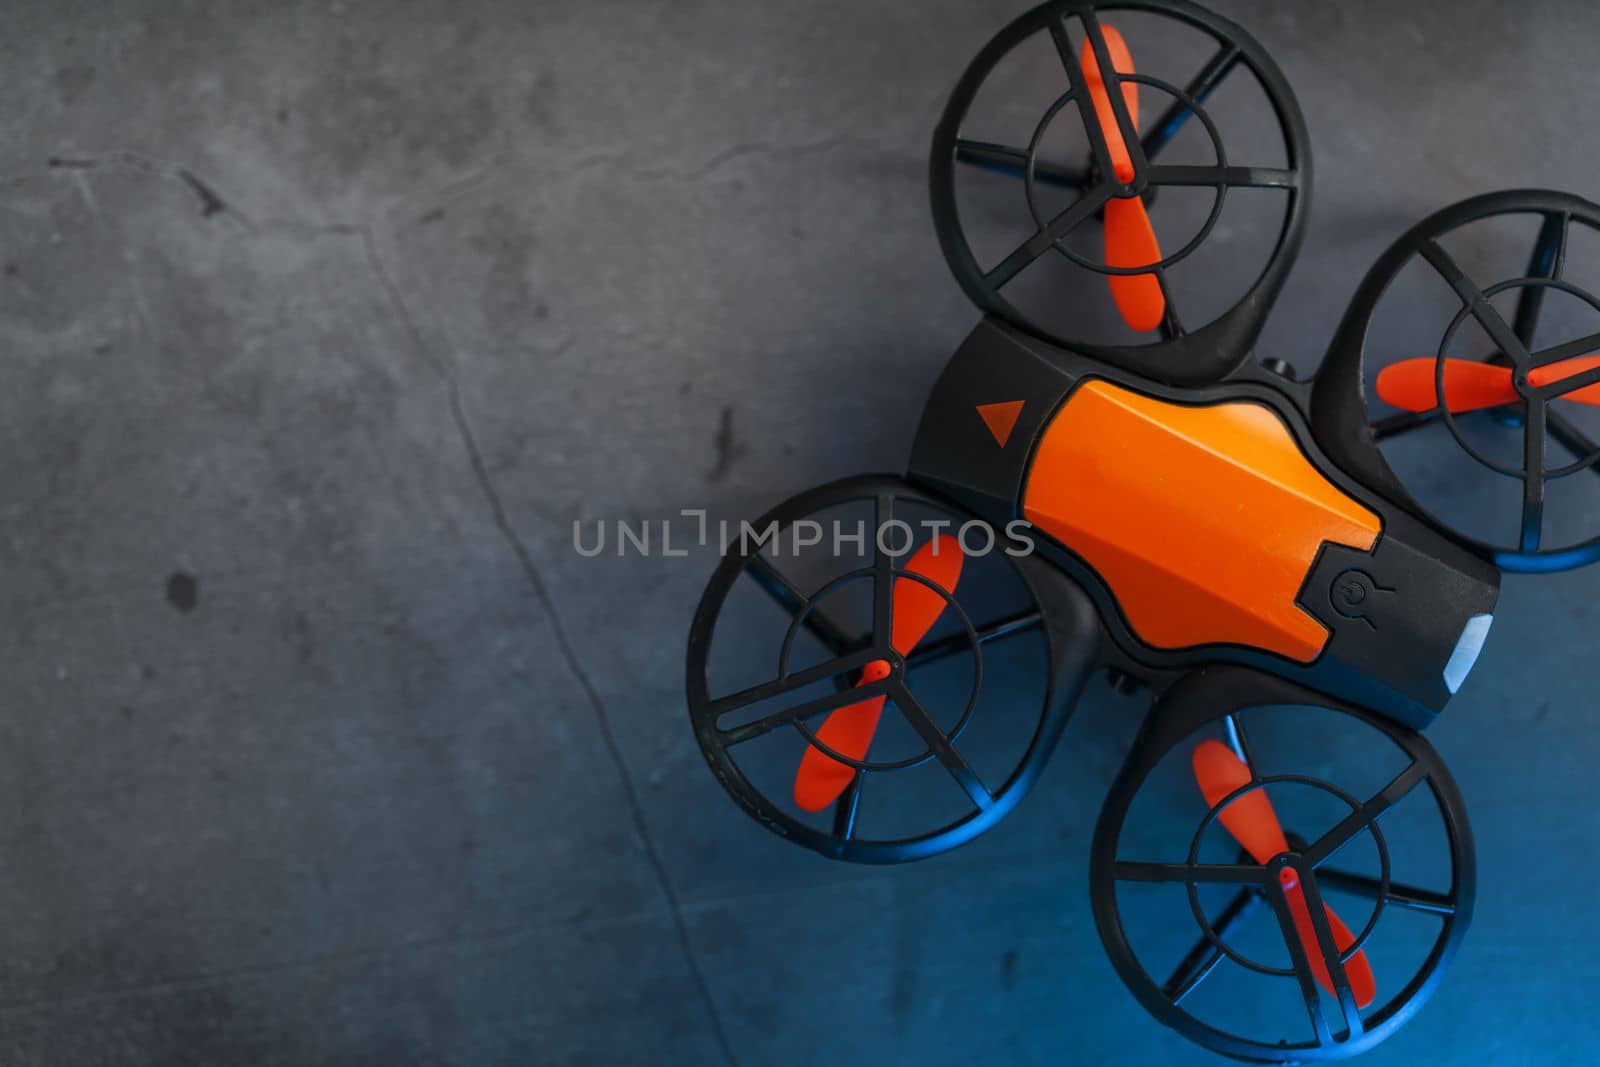 Orange quadcopter mini spy drone on a dark background with blue backlight and free space